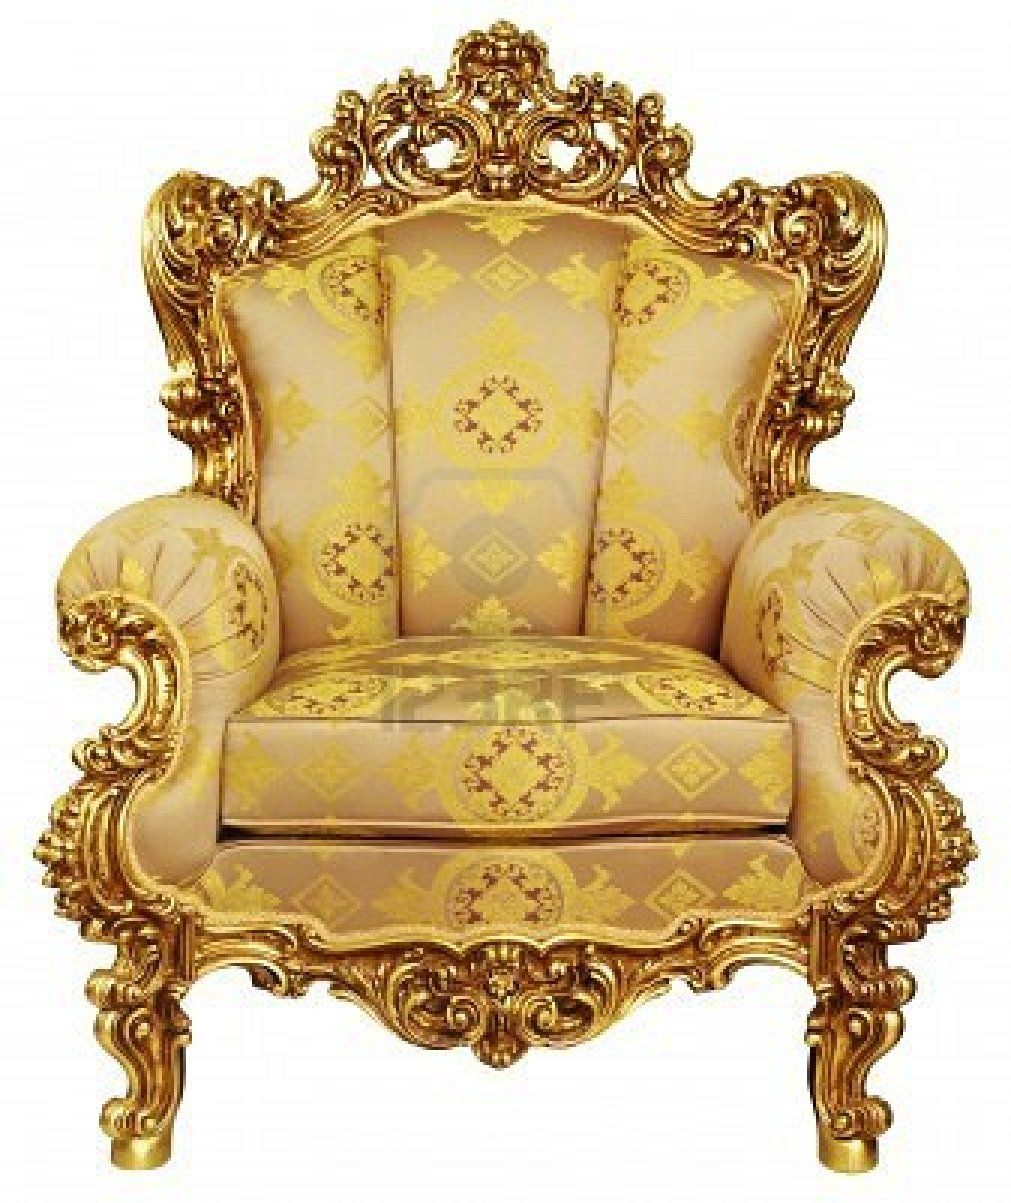 Photos King Chair Png For Iphone Hd Pics Image Detail High Resolution Isolated Gold Elbowchair - King, Transparent background PNG HD thumbnail